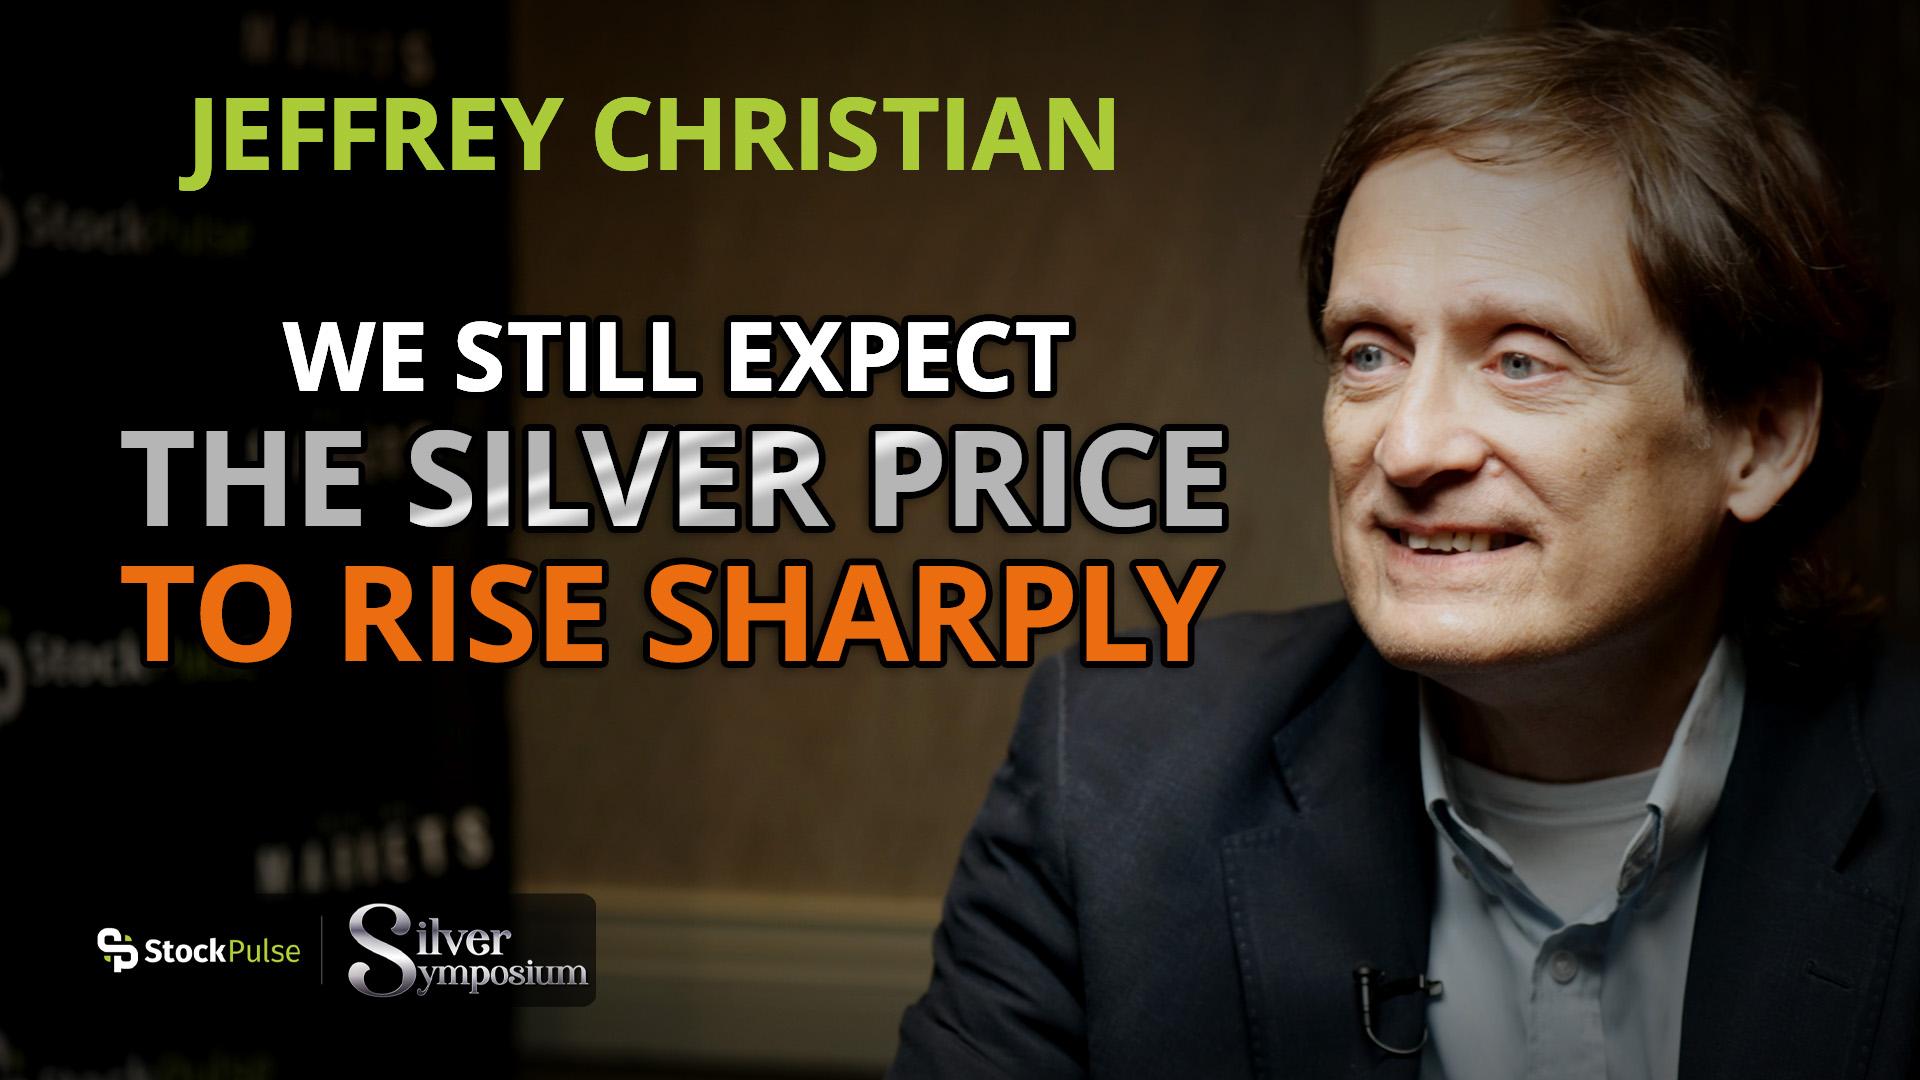 Jeffrey Christian: We Still Expect the Silver Price to Rise Sharply